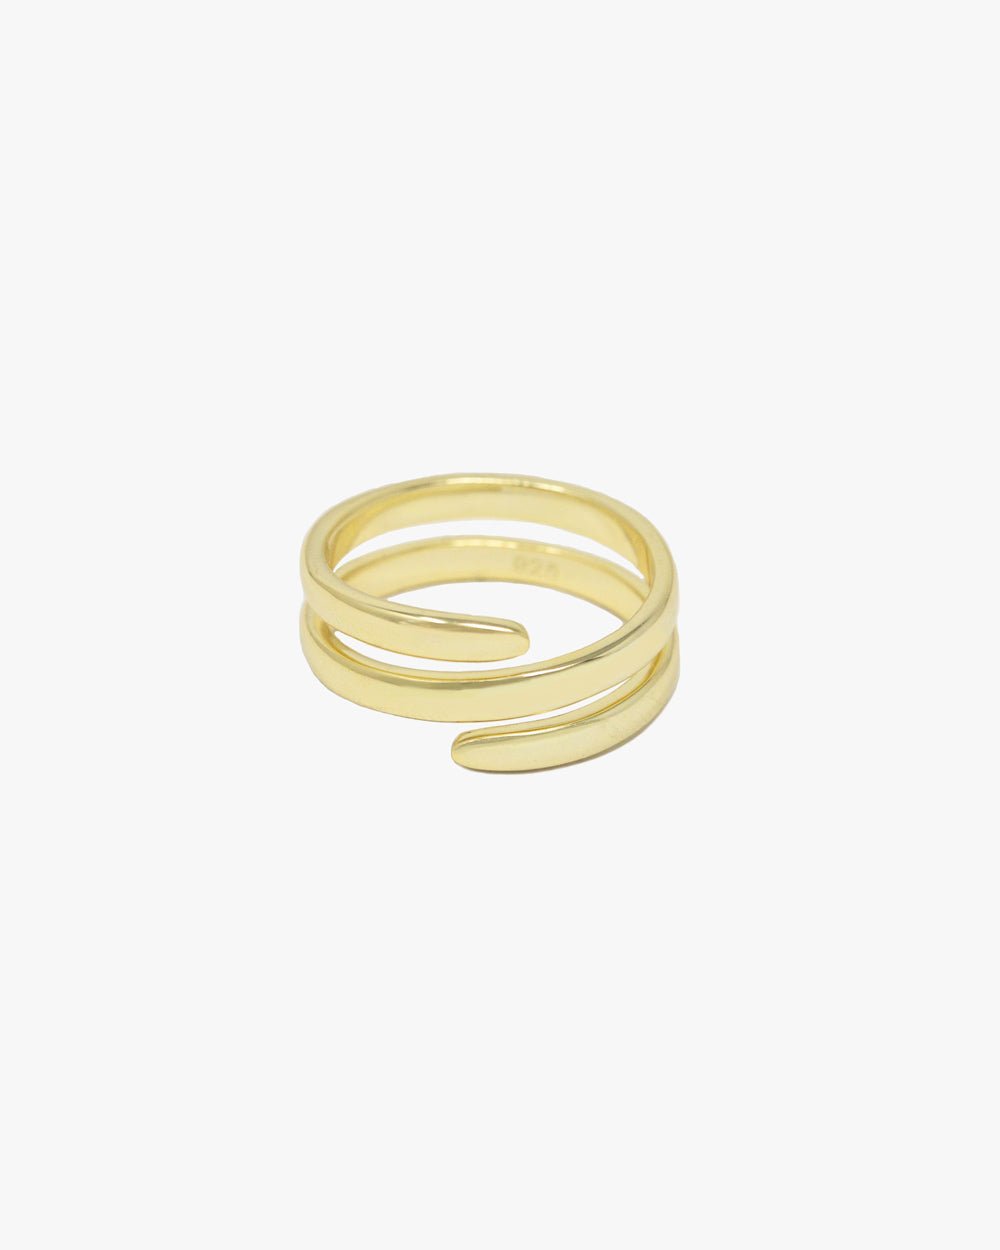 EMERSON GOLD WRAP RING - Shop Cupcakes and Cashmere